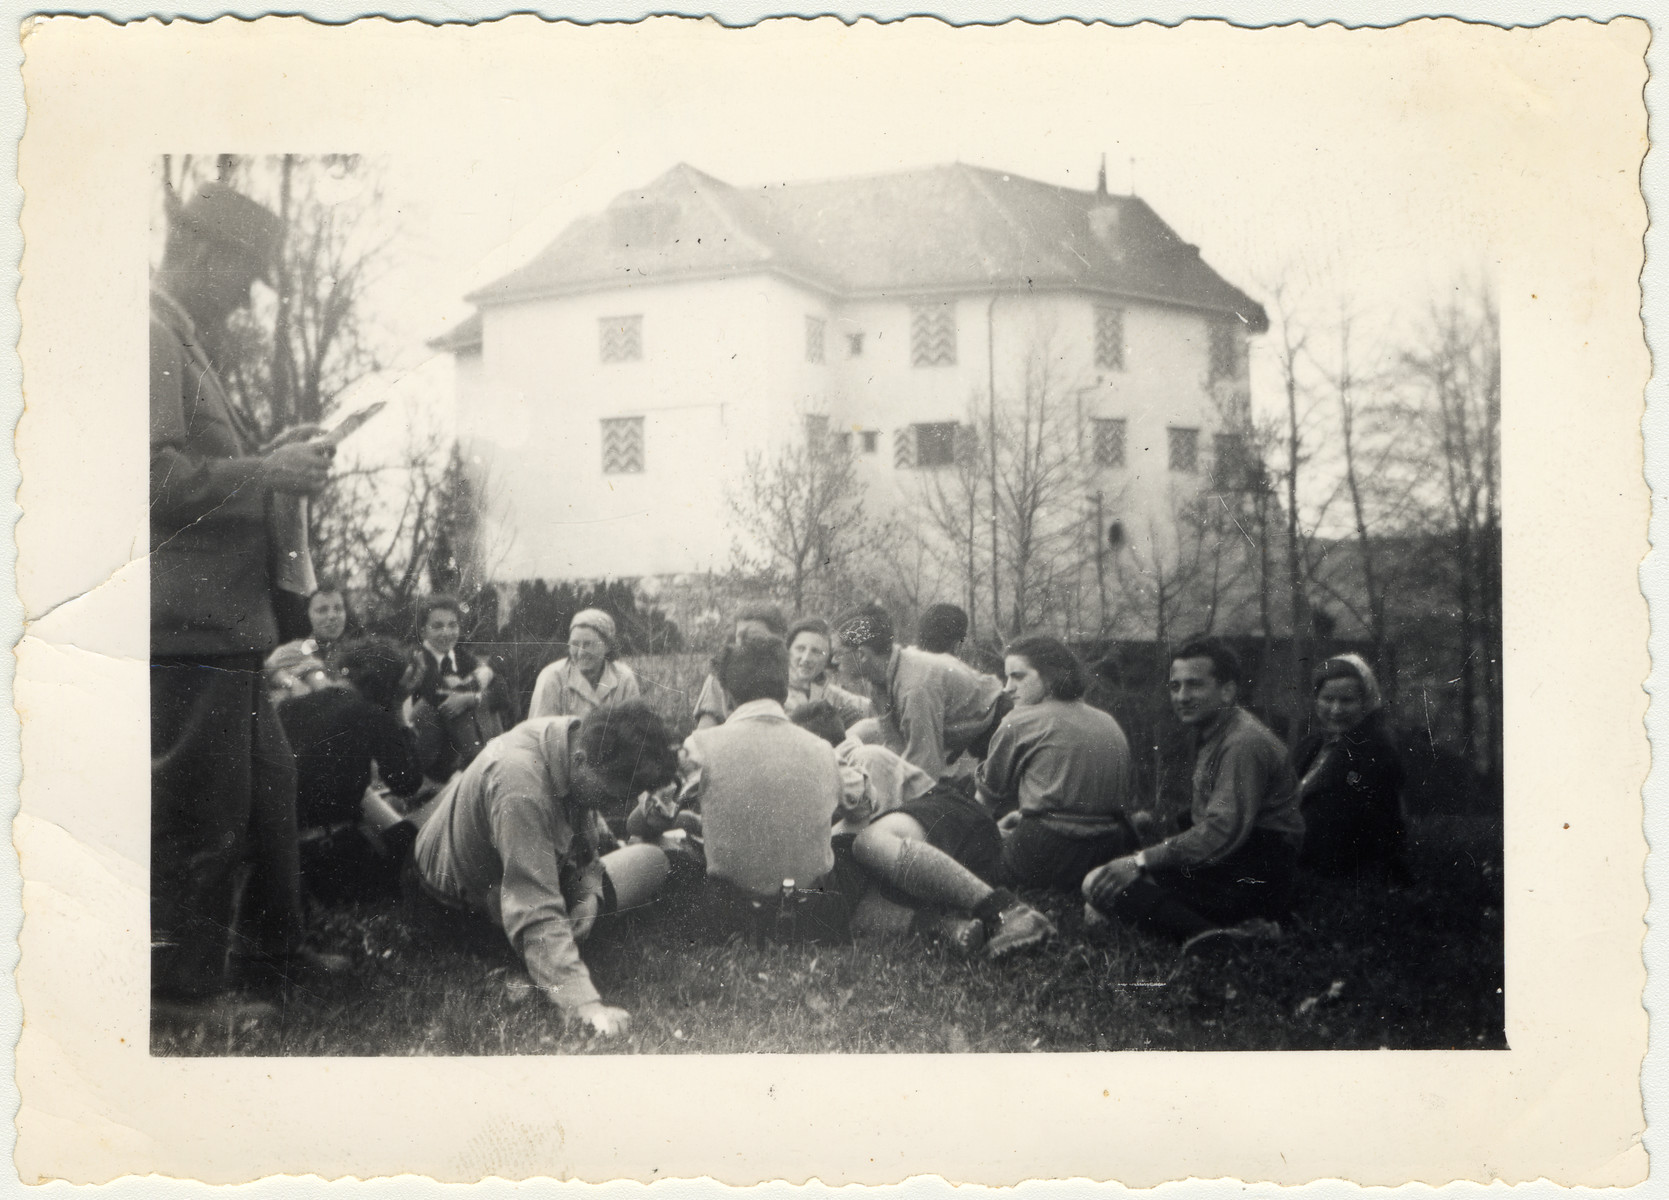 Zionist youth relax in the grass after work at Schloss von Elgg.